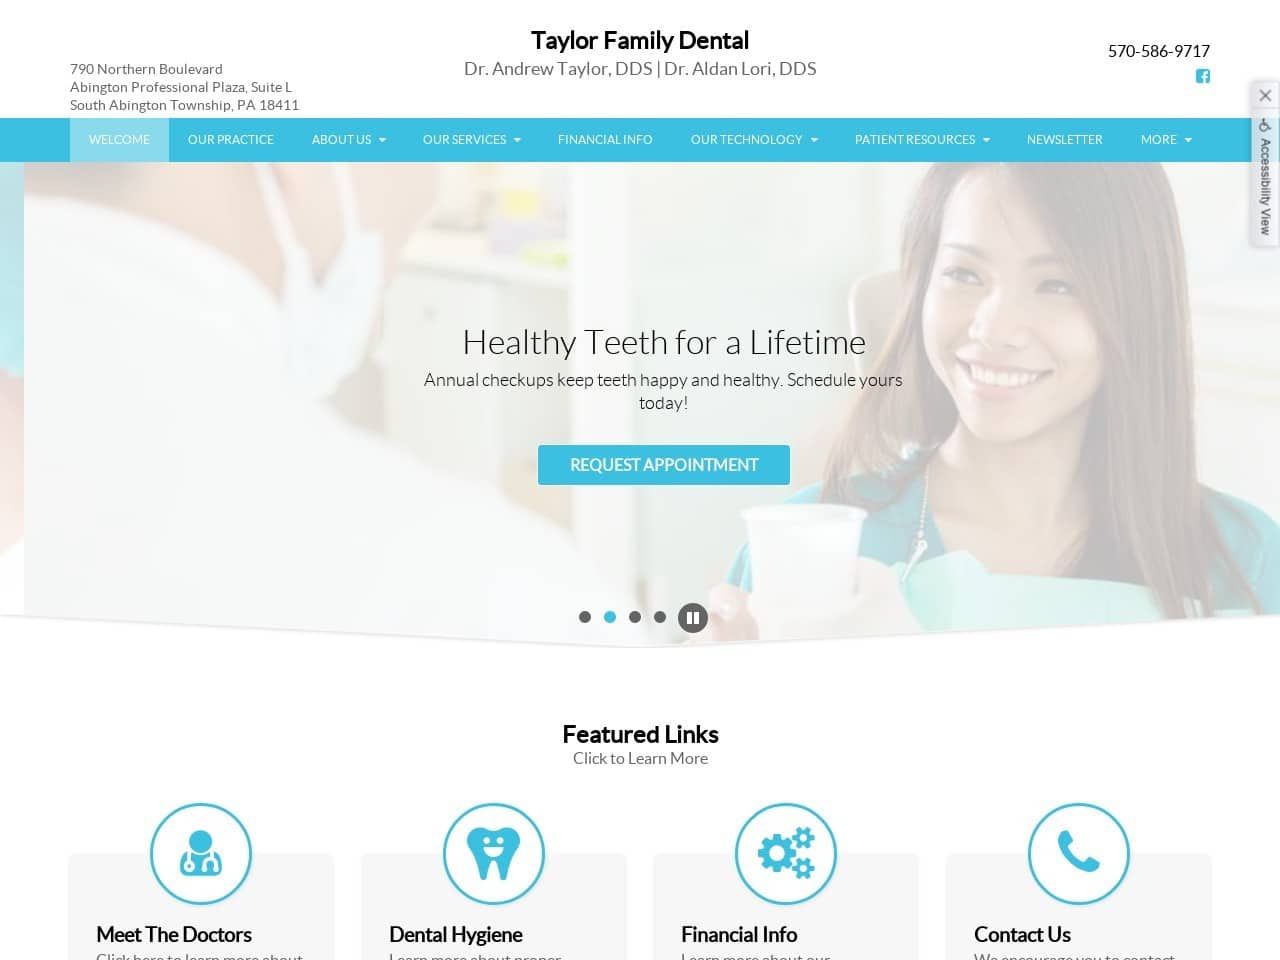 Taylor Andrew a DDS Website Screenshot from taylor-family-dental.com